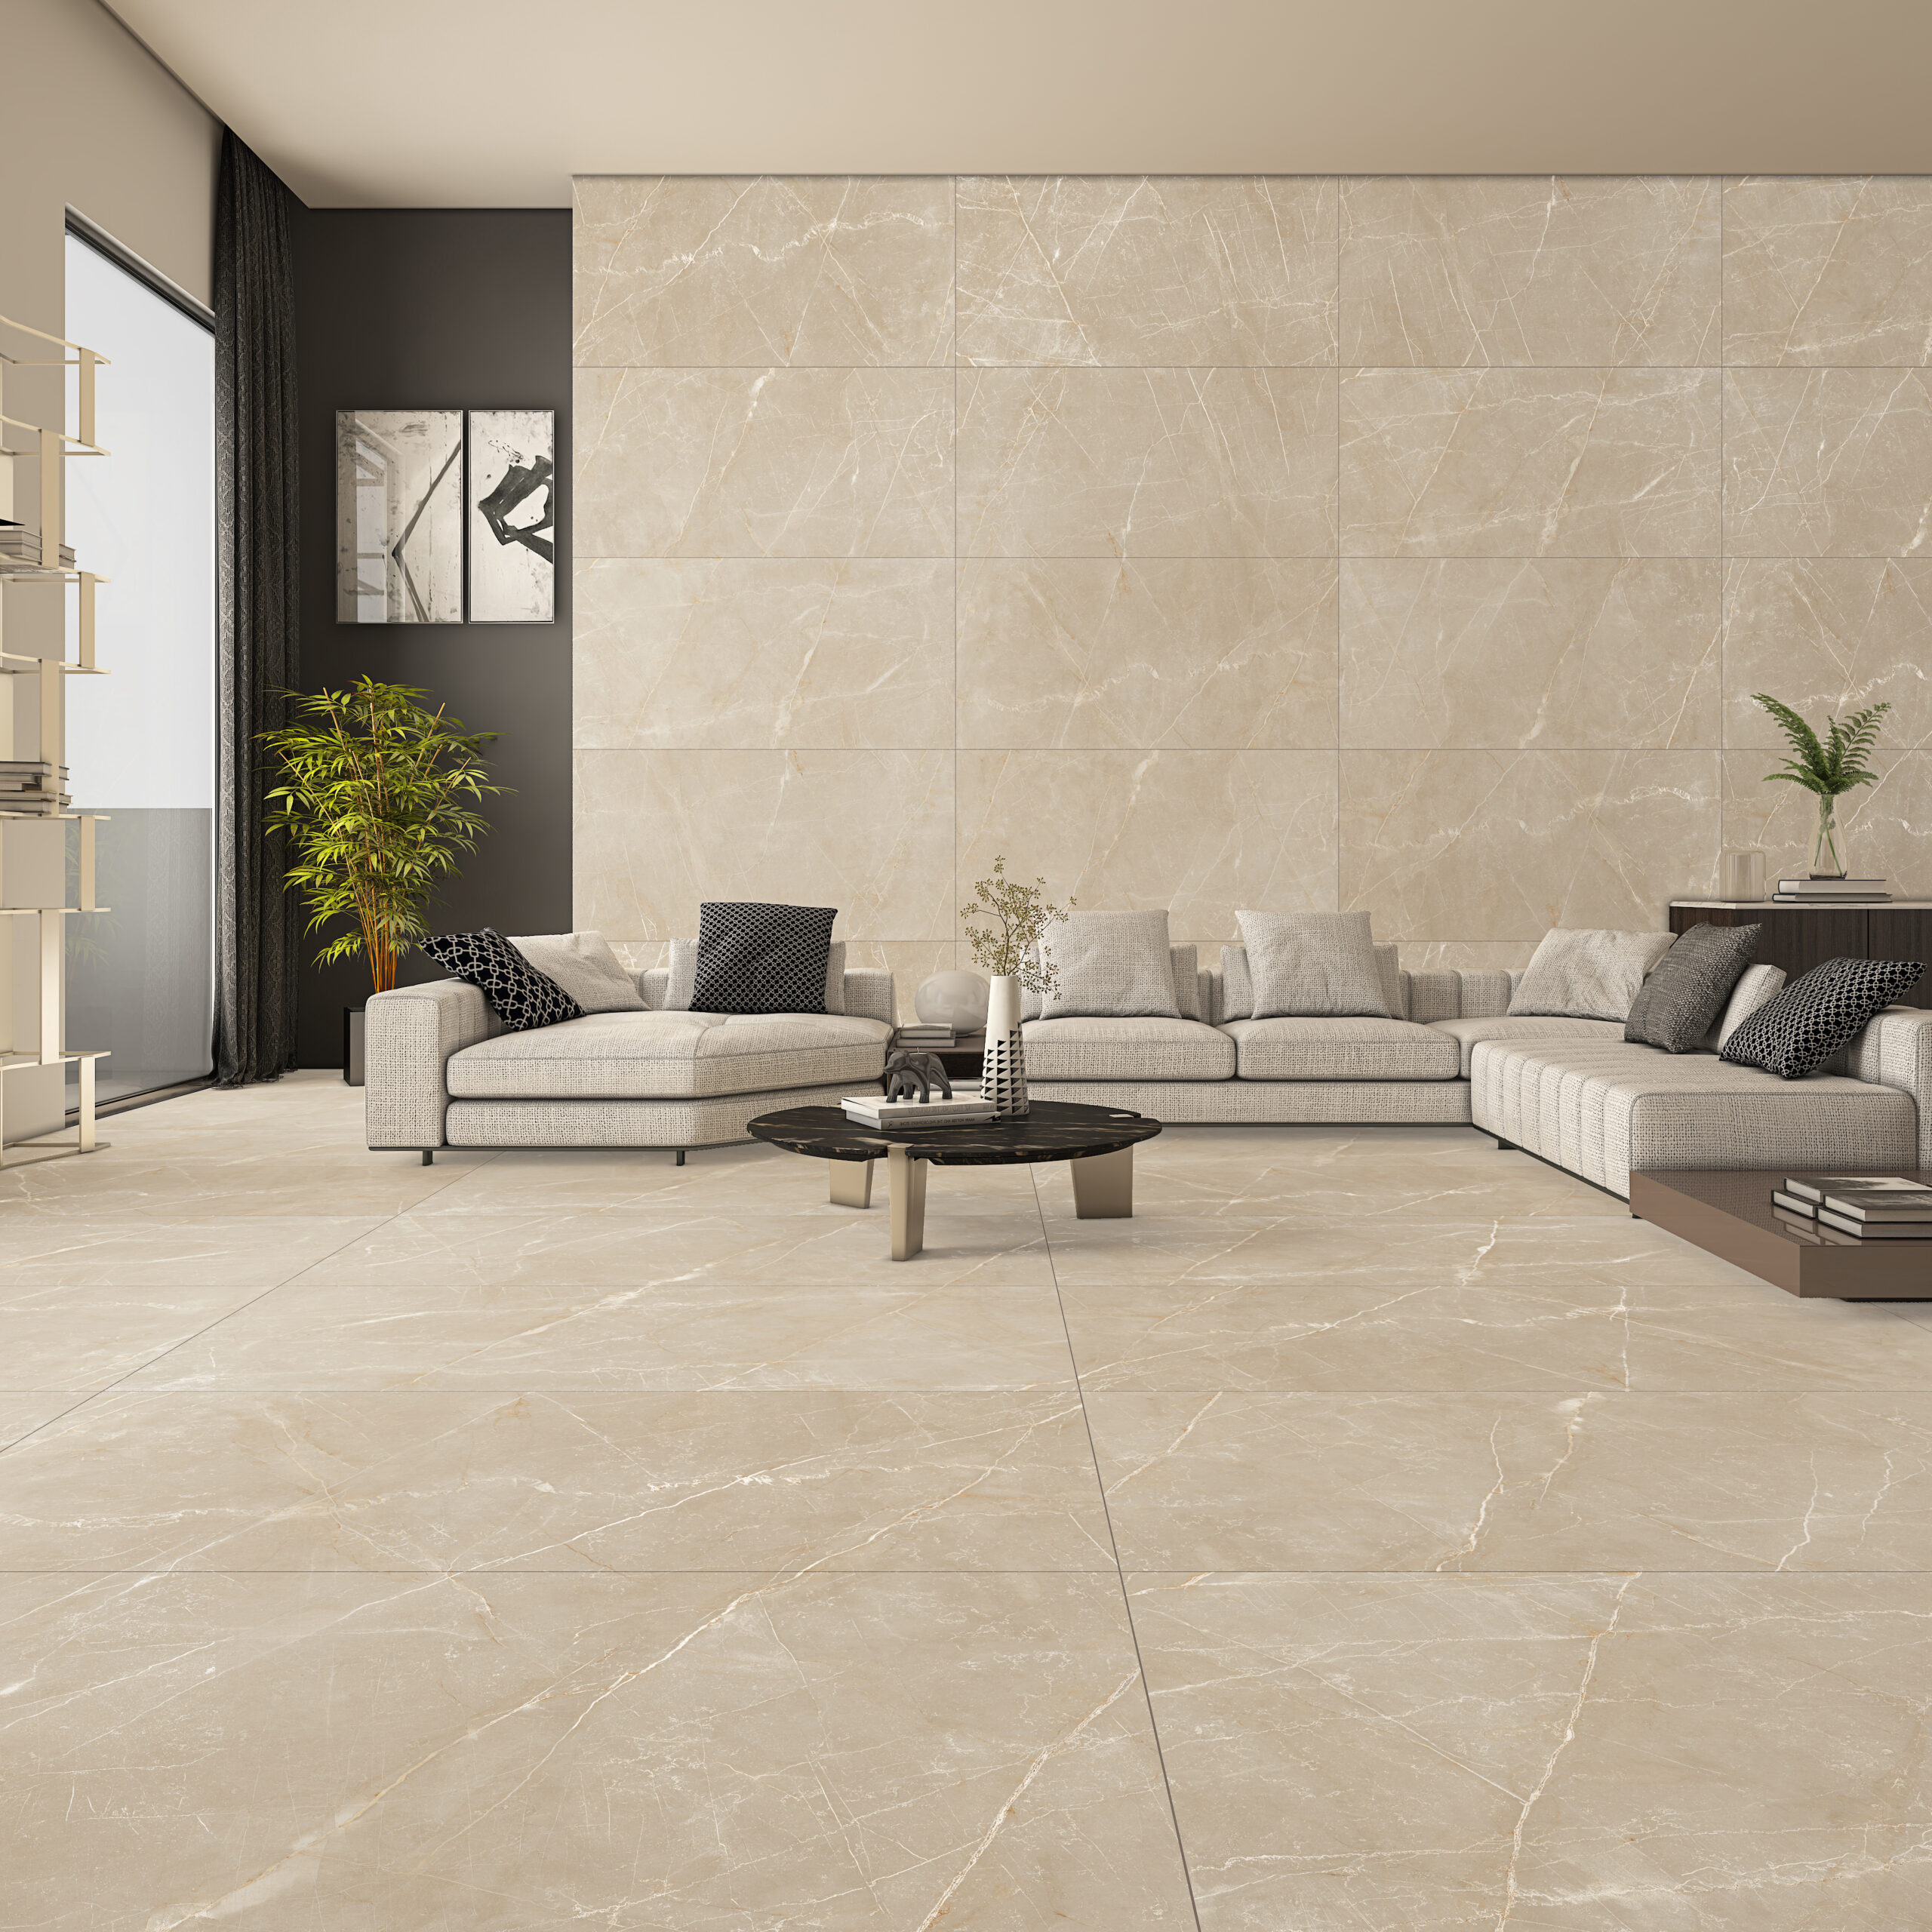 You are currently viewing Choosing the Perfect Flooring for Your New Home: Marble, Granite, or Tiles?